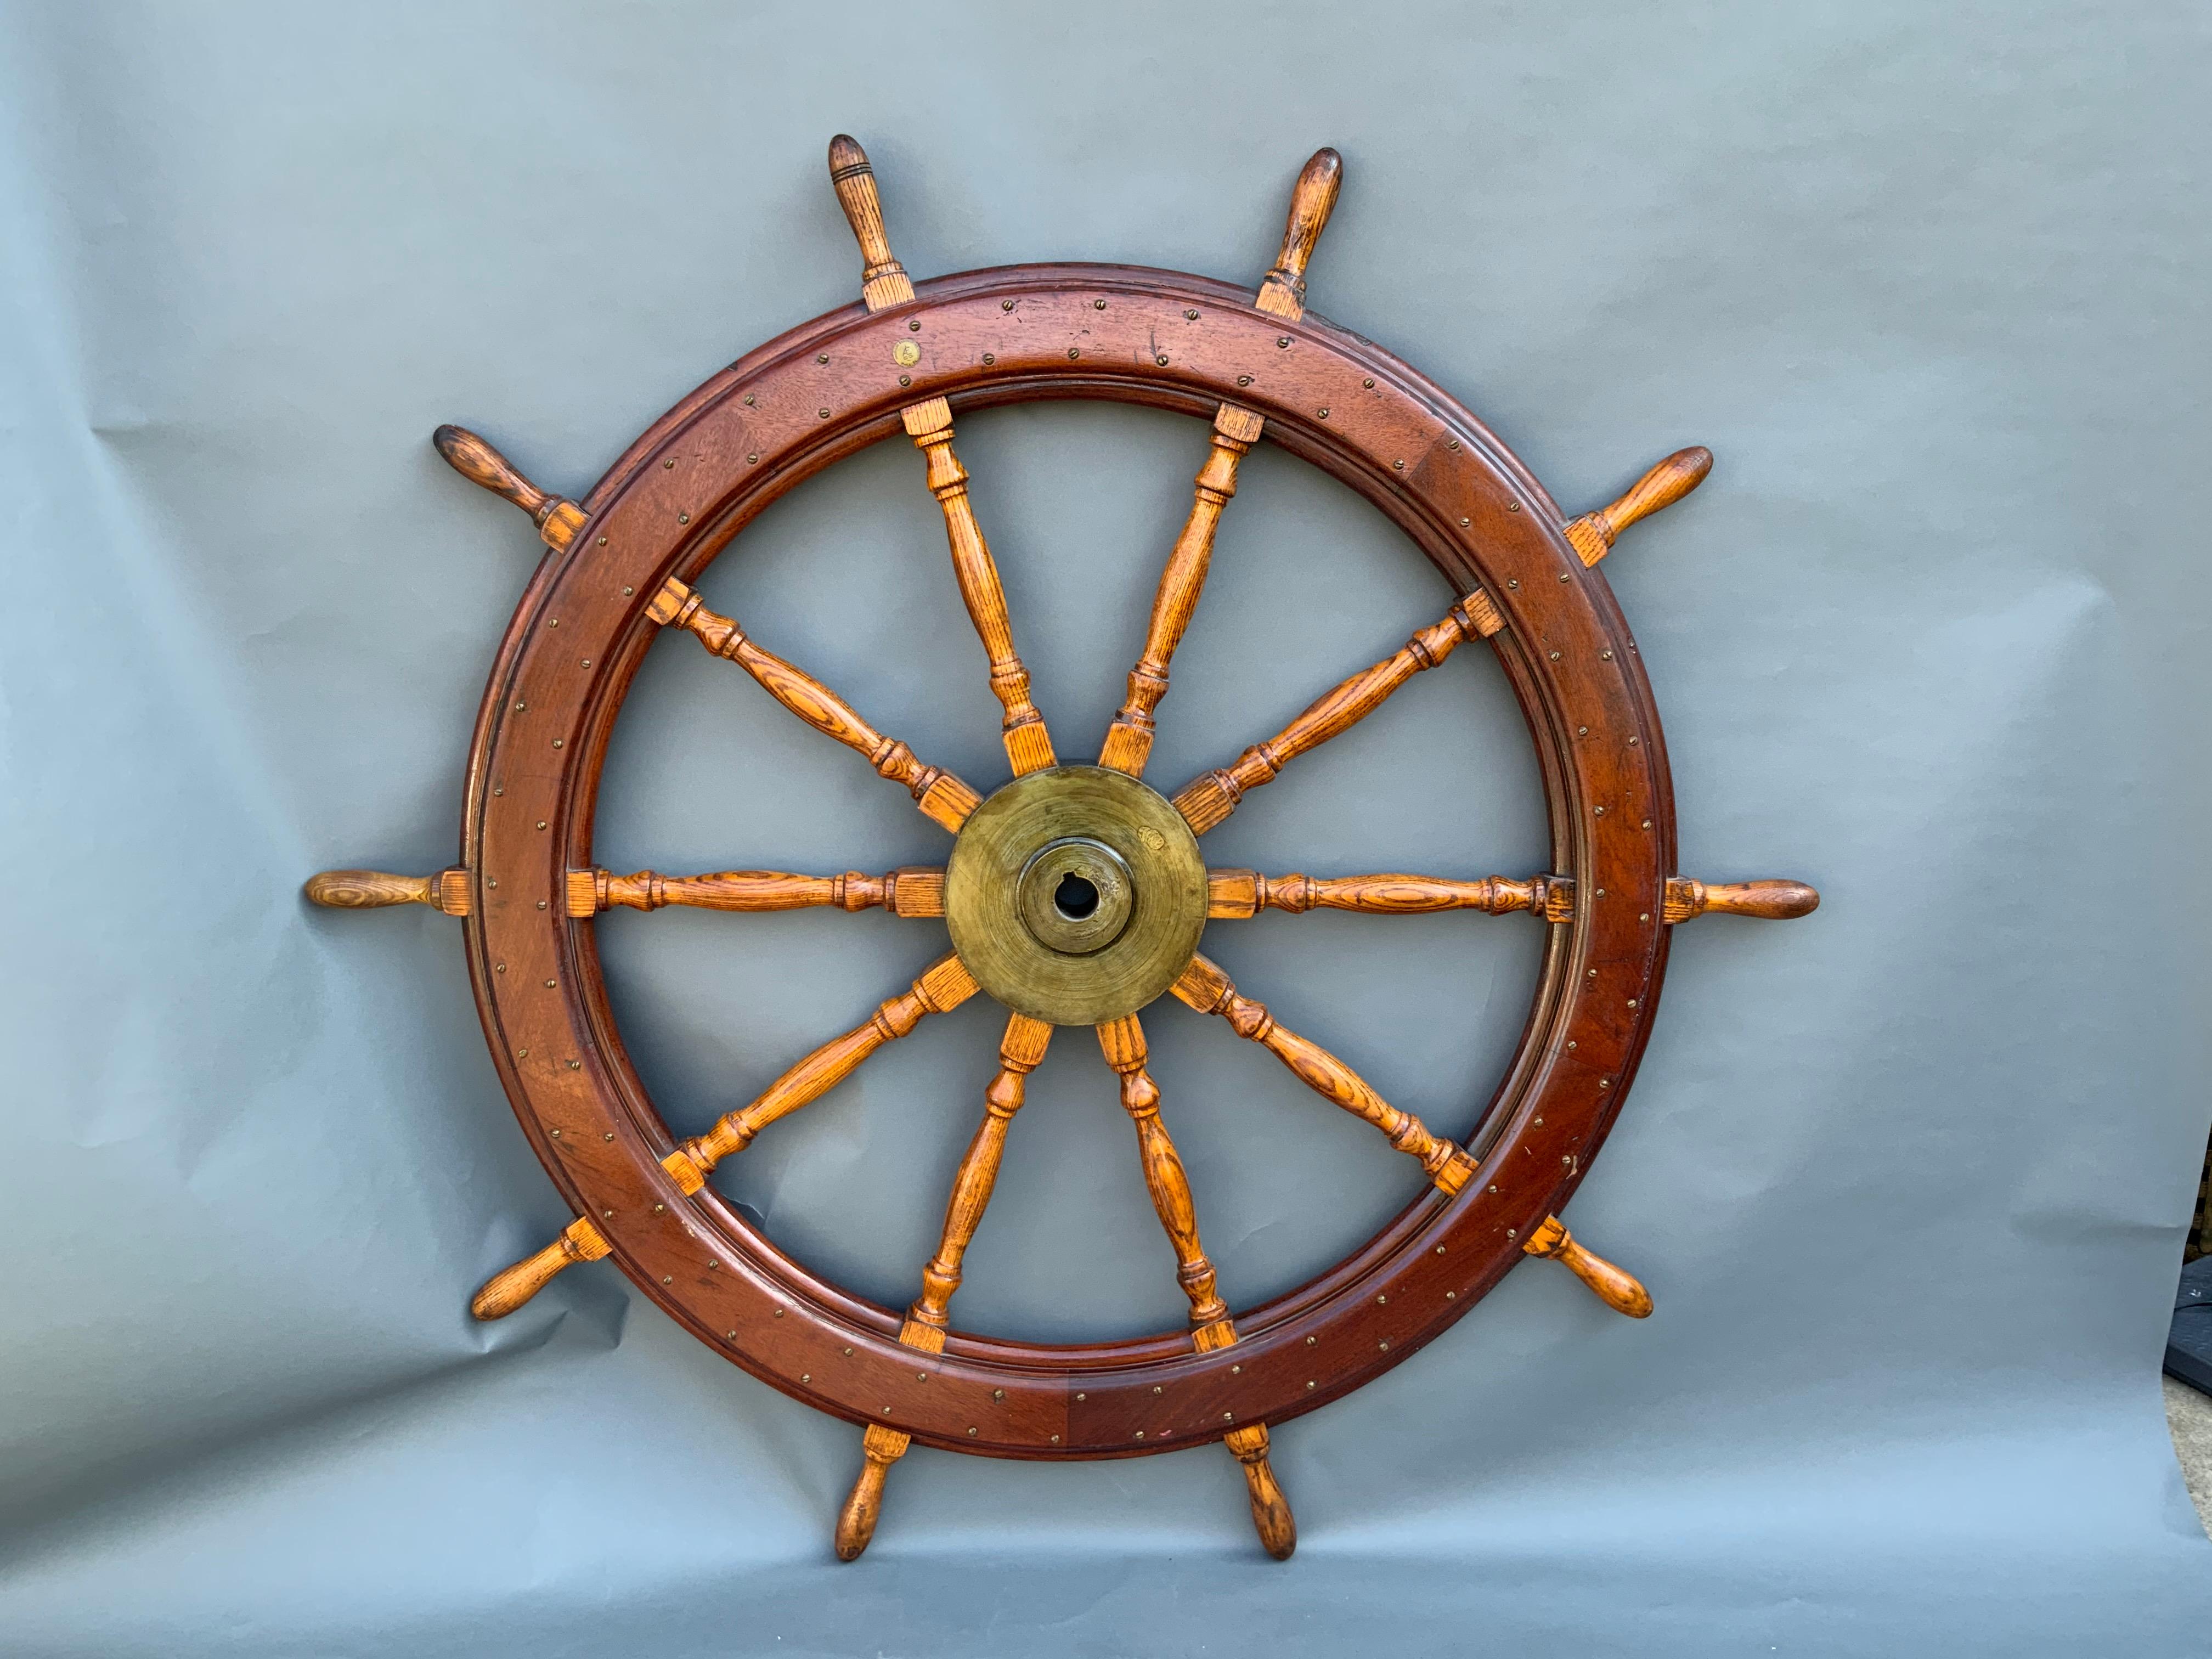 Large ten spoke ship's wheel by American Engineering Company of Philadelphia. Solid brass hub and maker's badge. The outer rings are fastened with dozens of round head brass screws. Varnish finish.

Overall dimensions: Weight is 100 pounds. Diameter